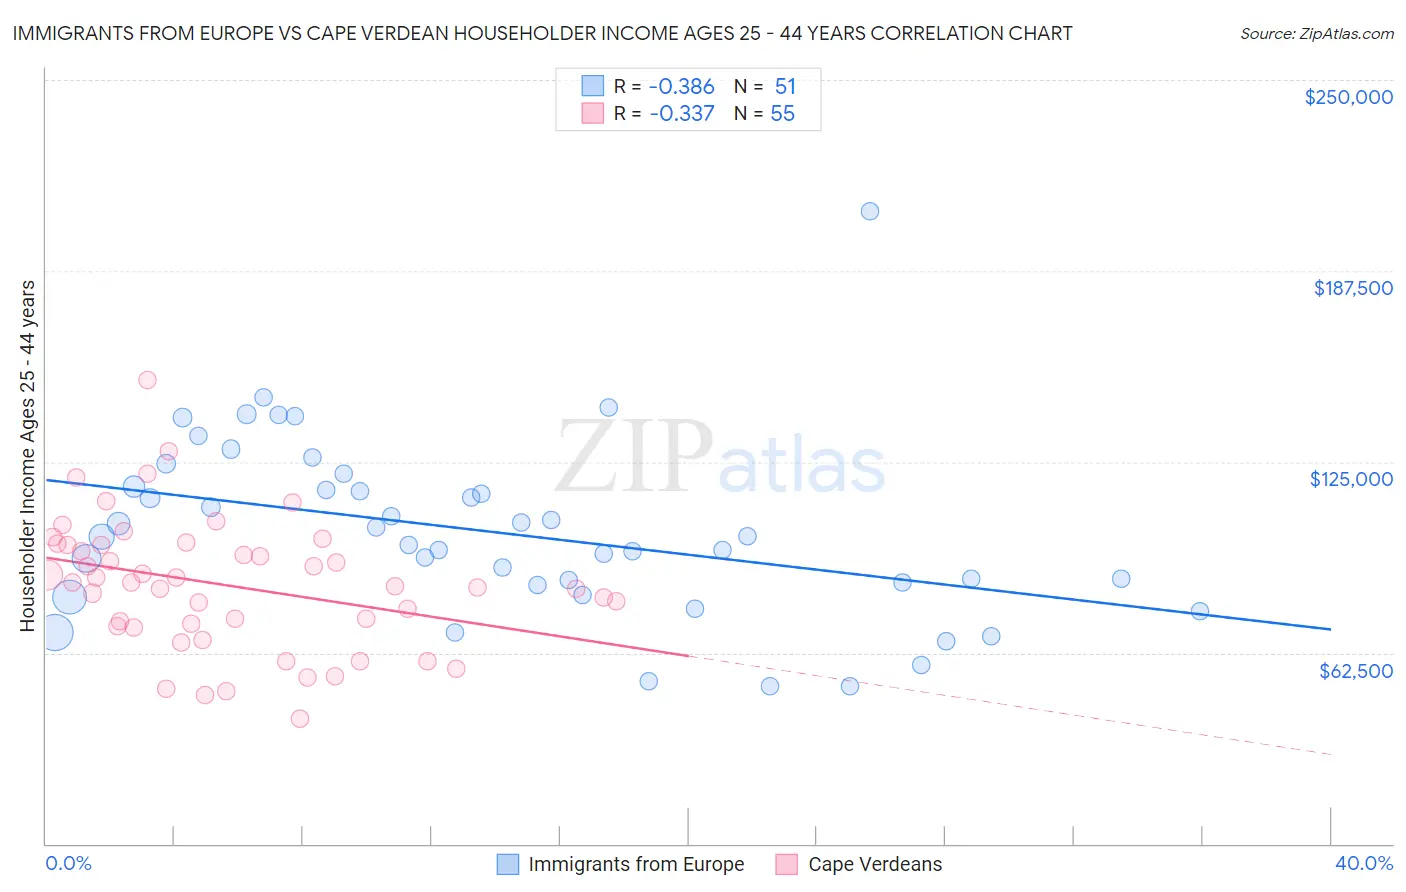 Immigrants from Europe vs Cape Verdean Householder Income Ages 25 - 44 years